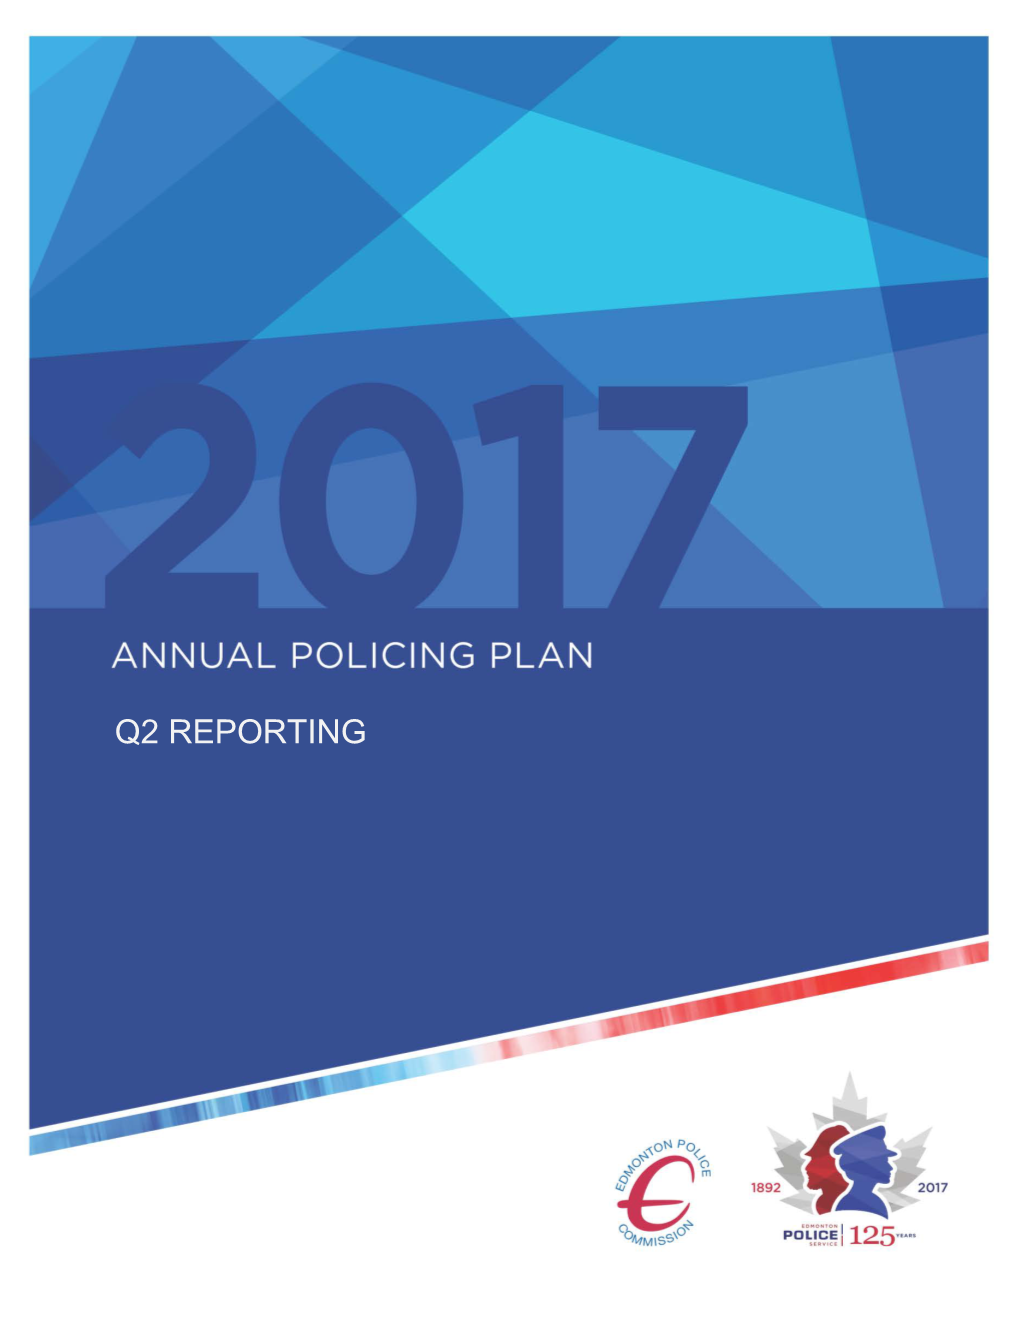 2017 EPS Annual Policing Plan Second Quarter Report